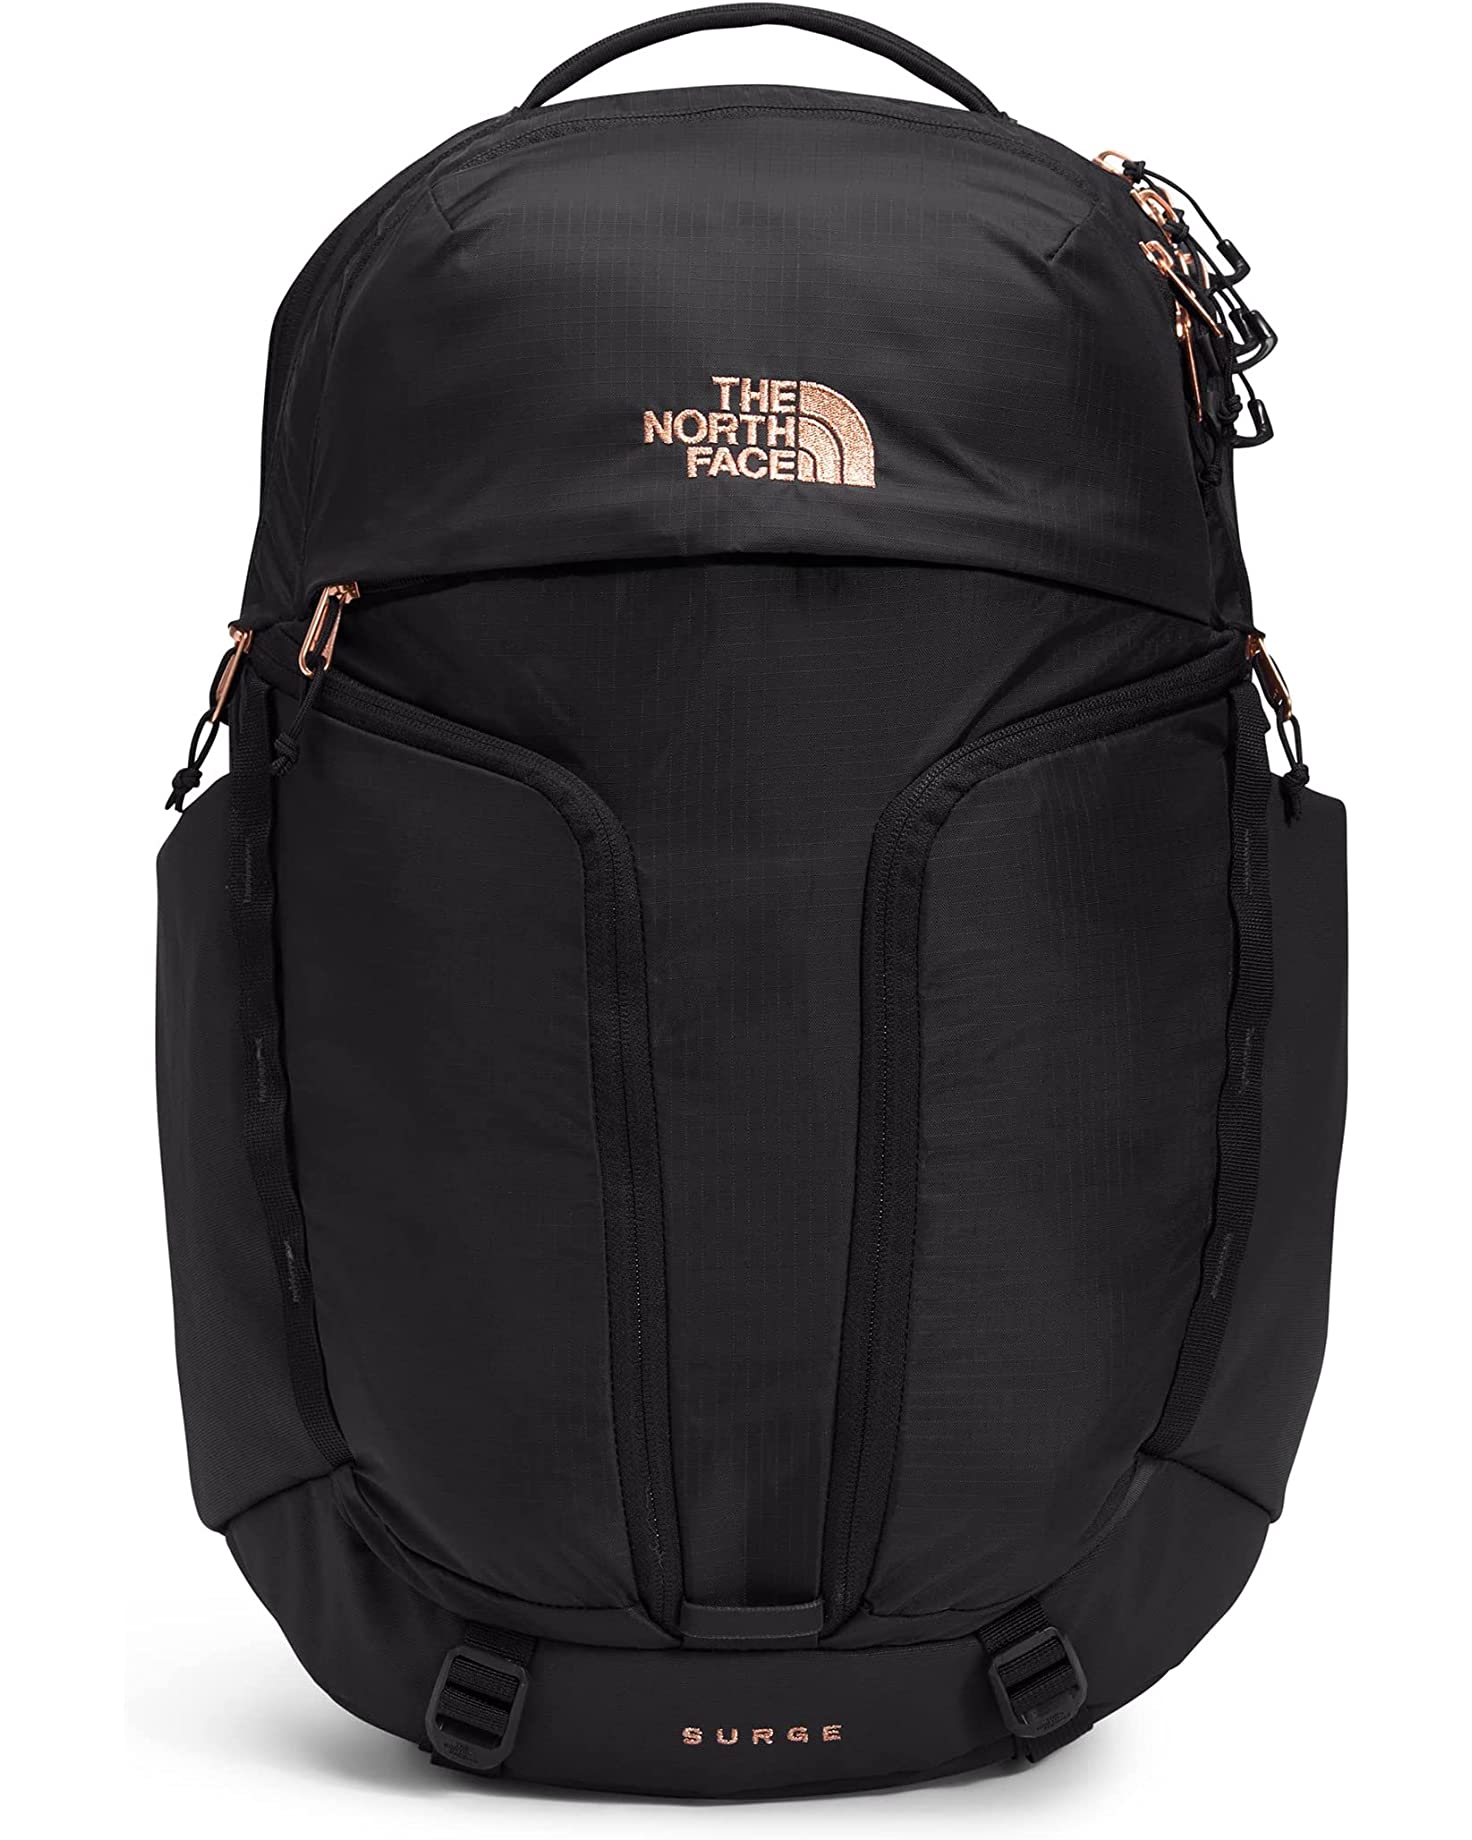 The North Face Women's Surge Backpack Accessories North Face TNF Black/Burnt Coral Metallic-7ZQ  